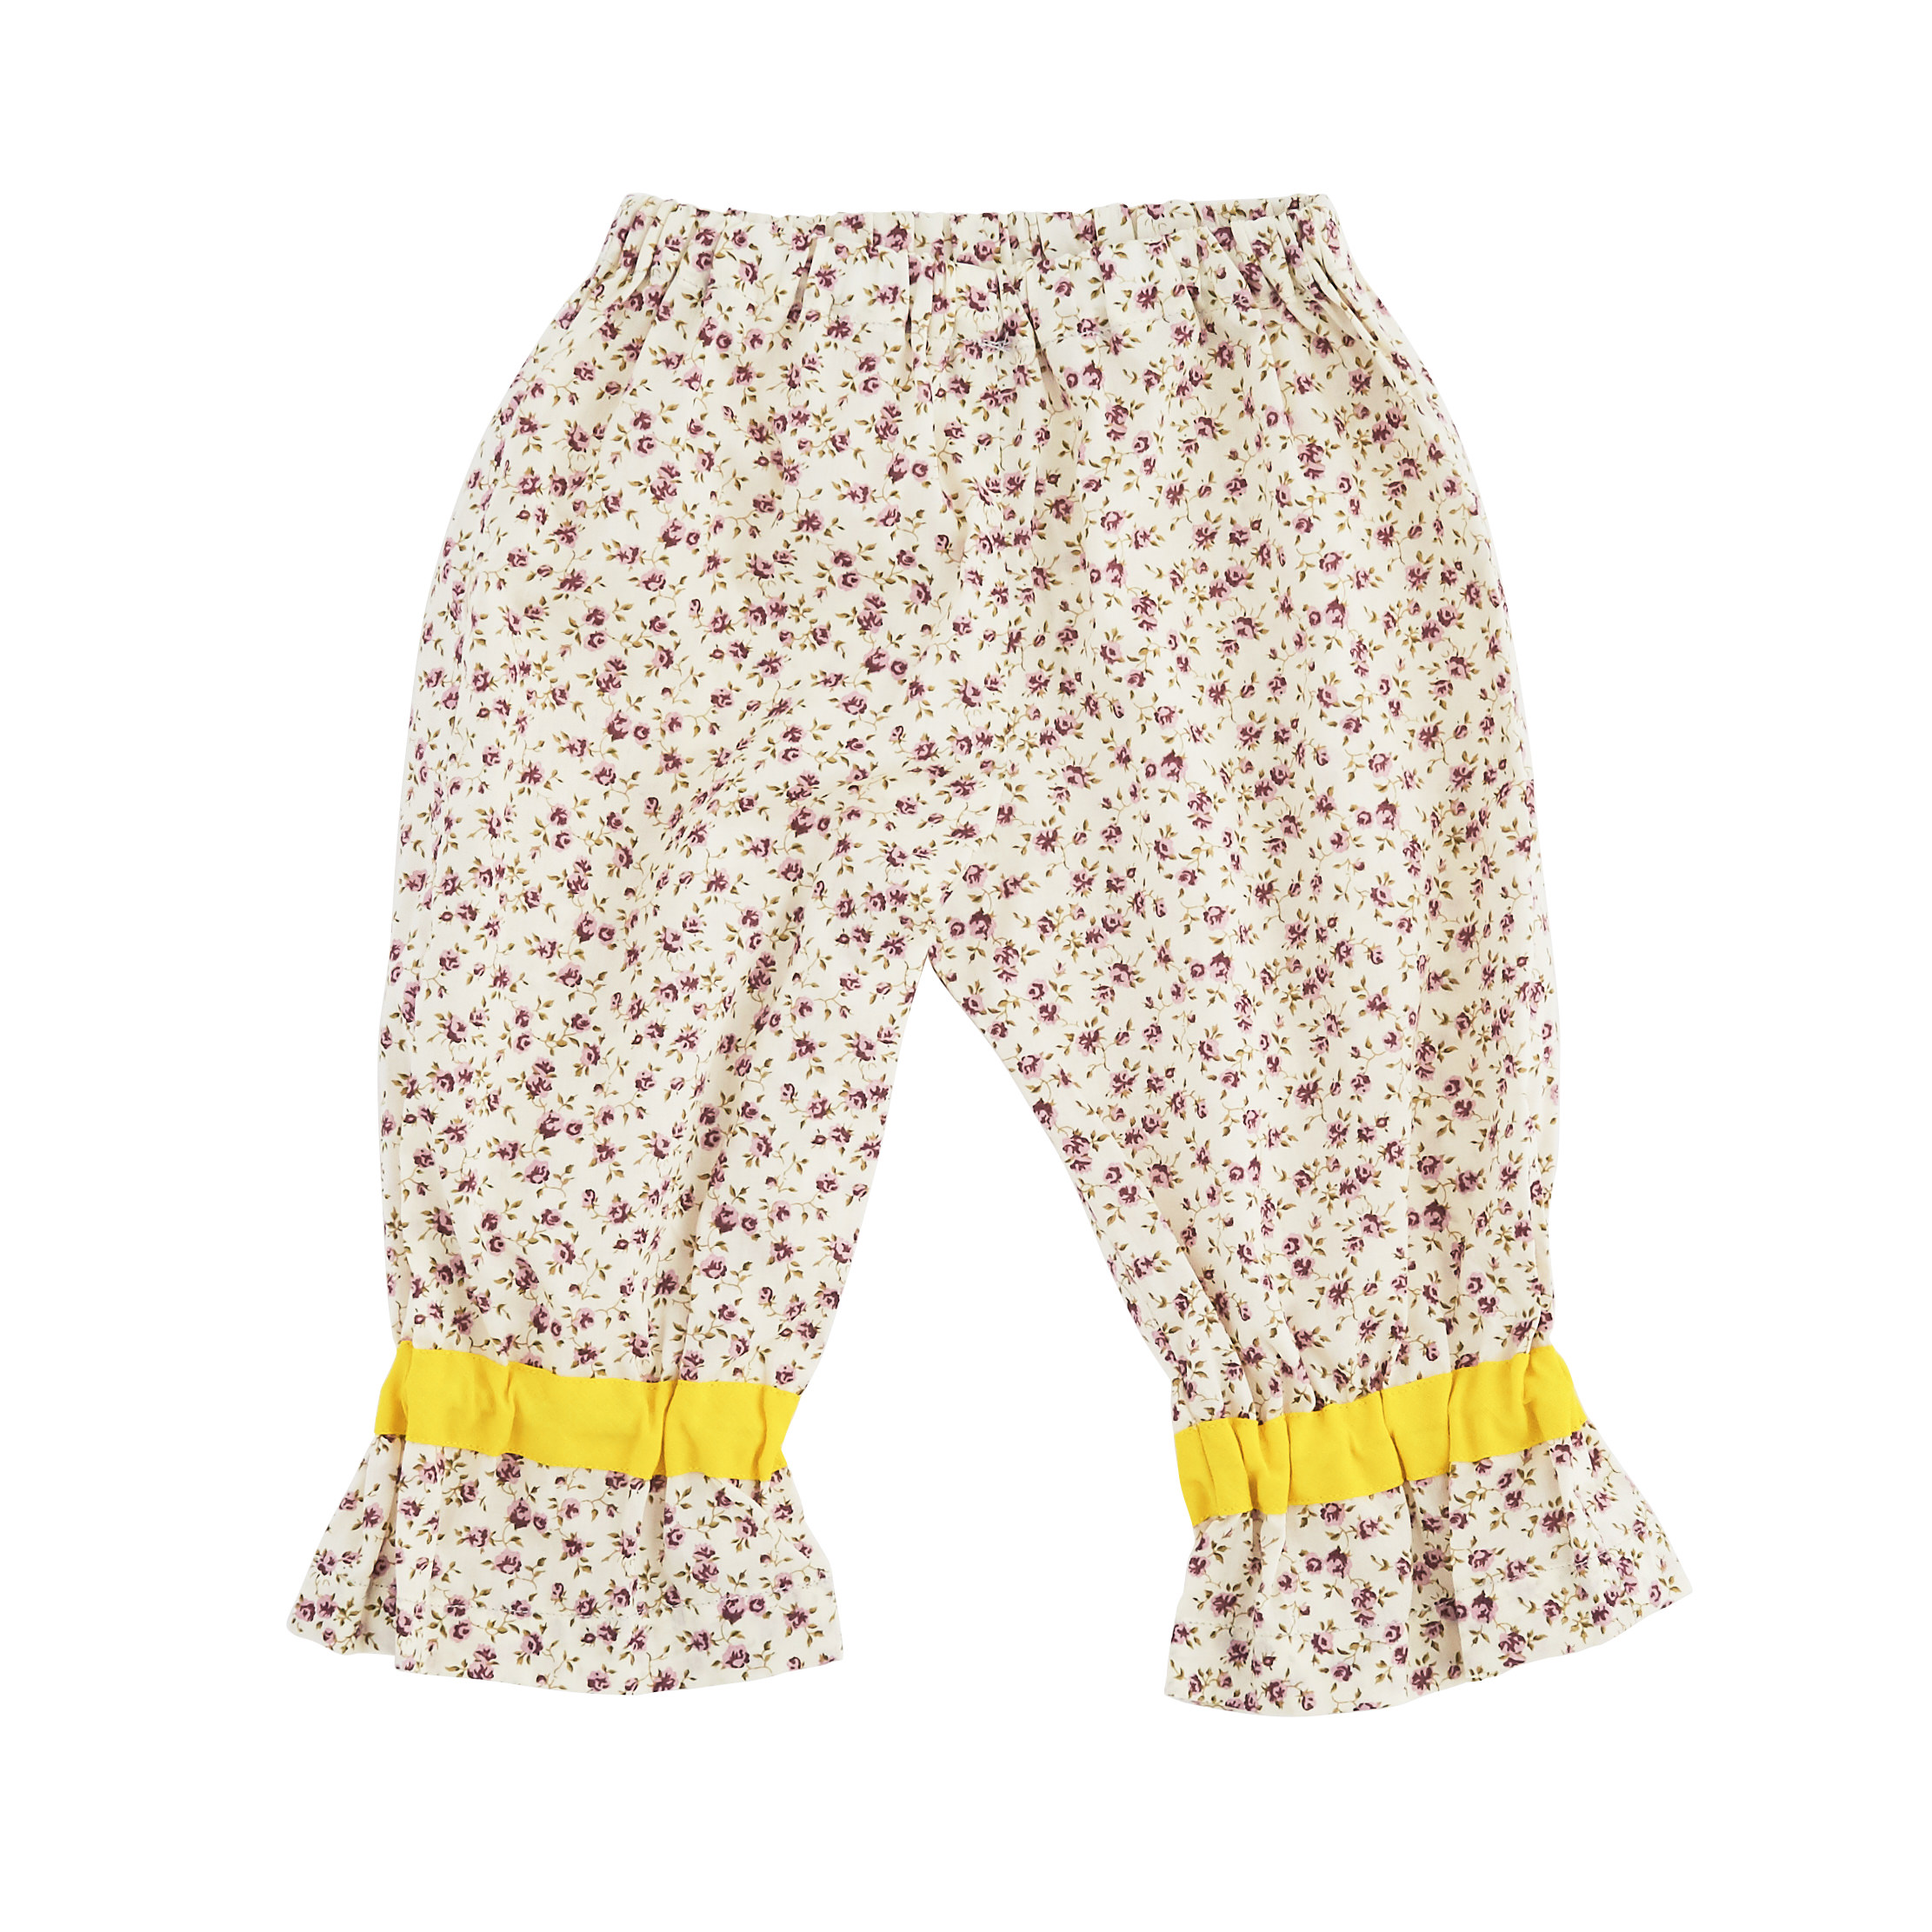 Babygirl yellow patterned harems toddler girl cute design cotton pants  isolated over white infant girls casual summer  CanStock